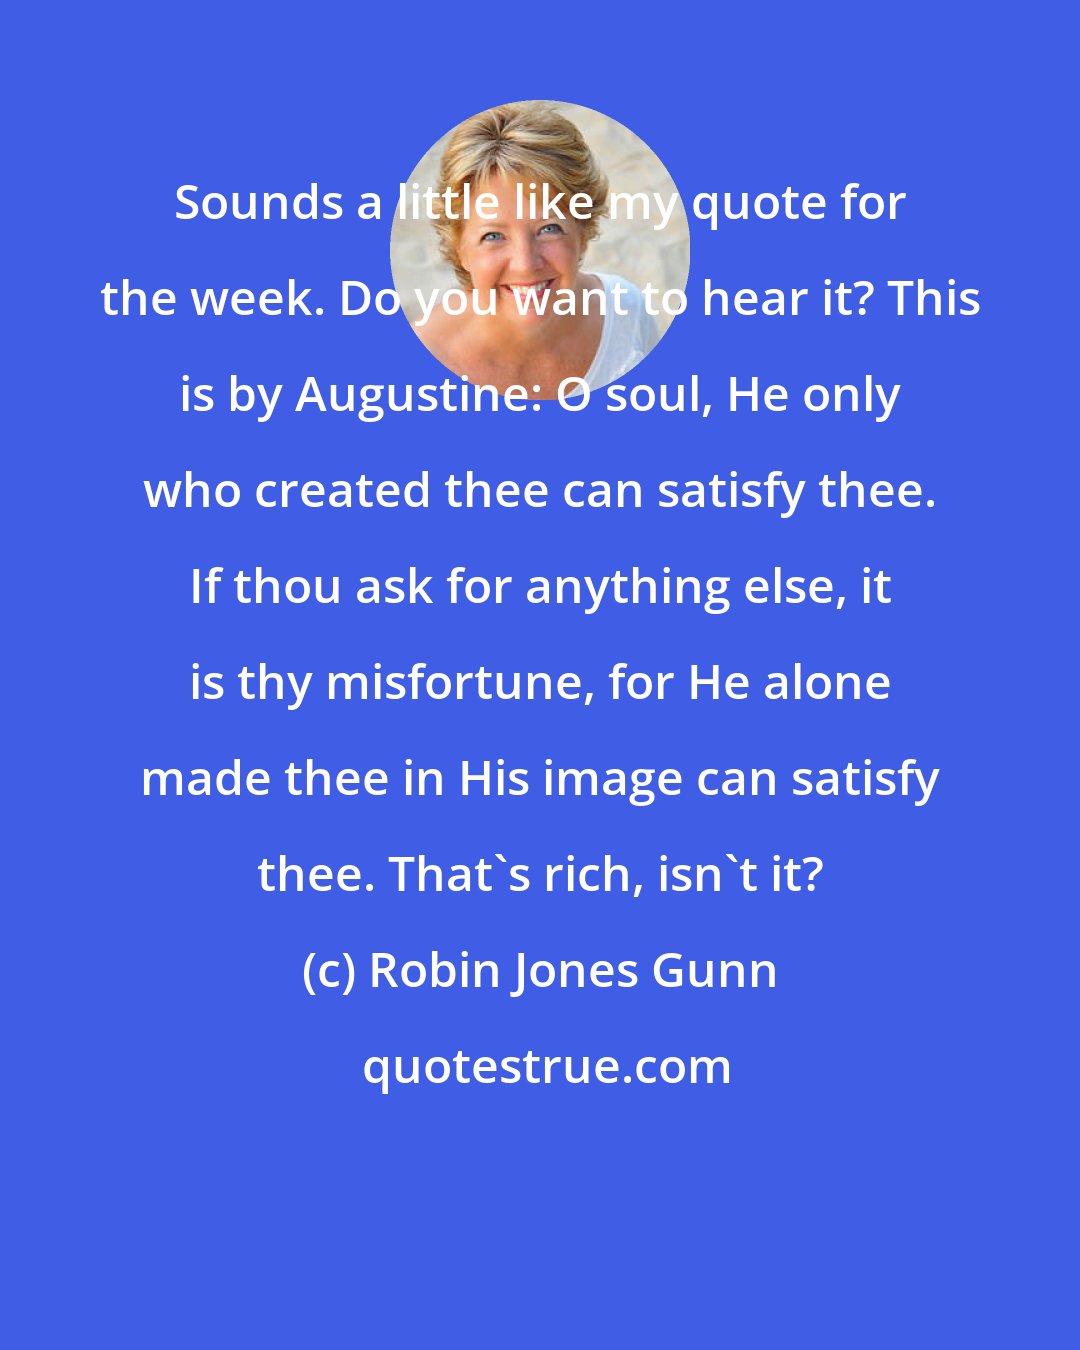 Robin Jones Gunn: Sounds a little like my quote for the week. Do you want to hear it? This is by Augustine: O soul, He only who created thee can satisfy thee. If thou ask for anything else, it is thy misfortune, for He alone made thee in His image can satisfy thee. That's rich, isn't it?